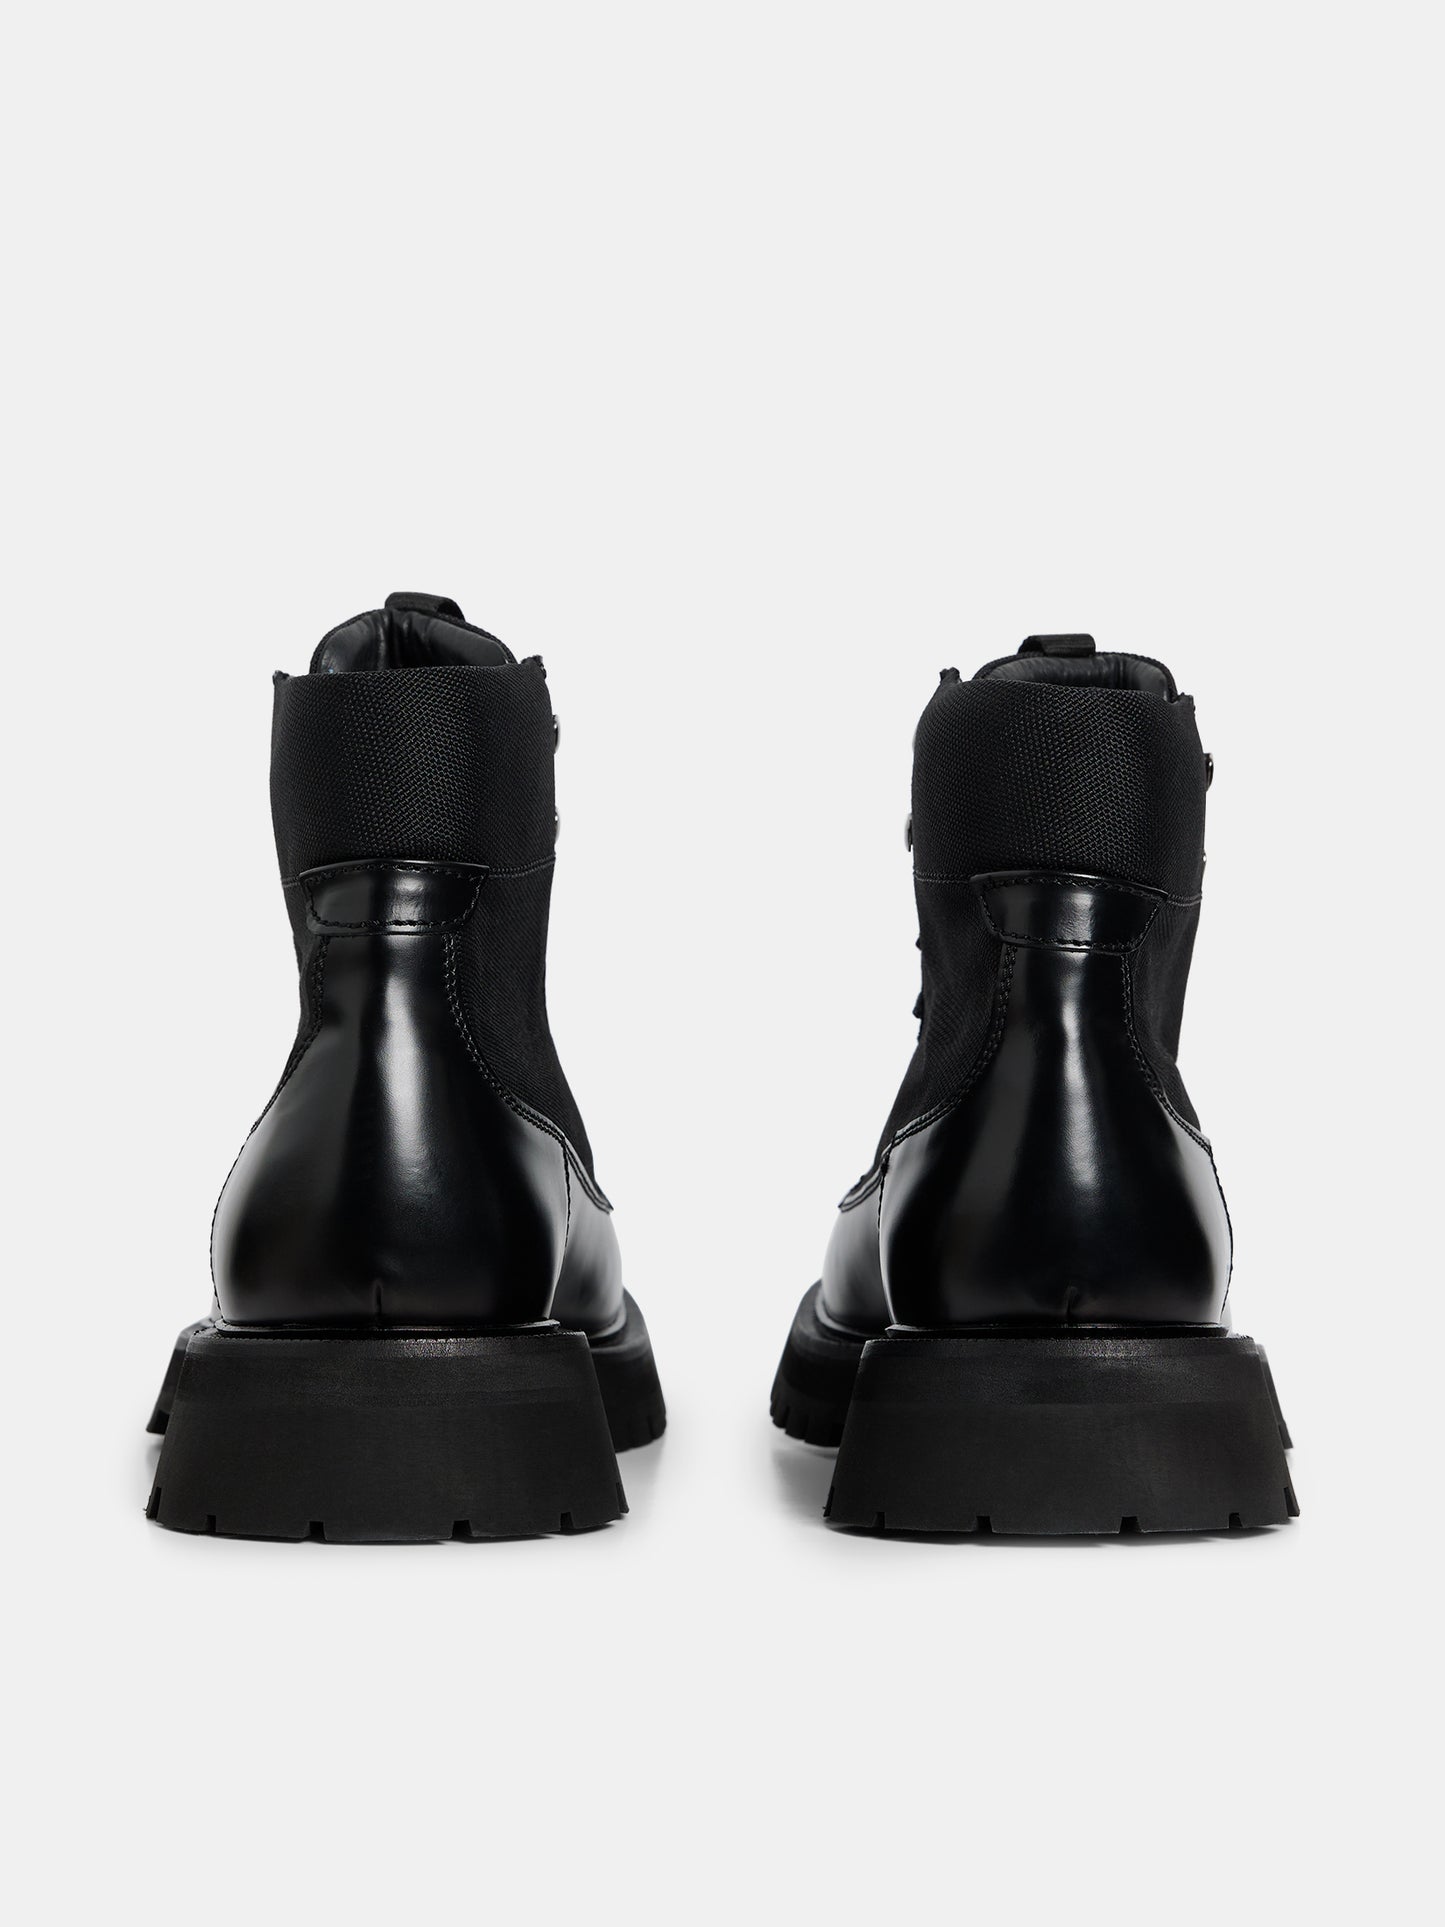 Maddox Tech Leather Boot / Black